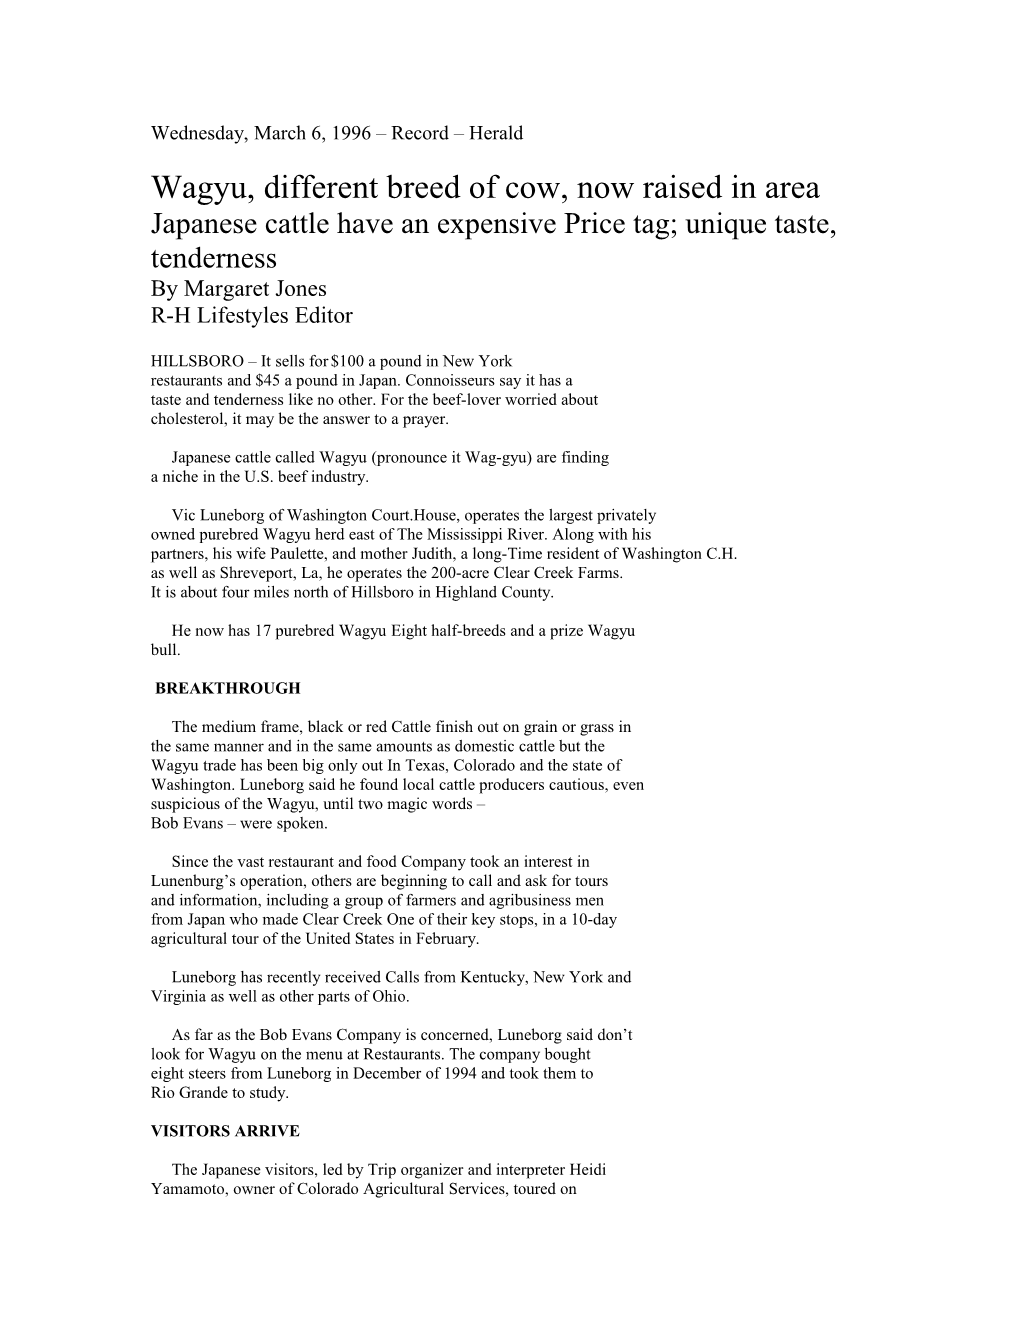 Wagyu, Different Breed of Cow, Now Raised in Area